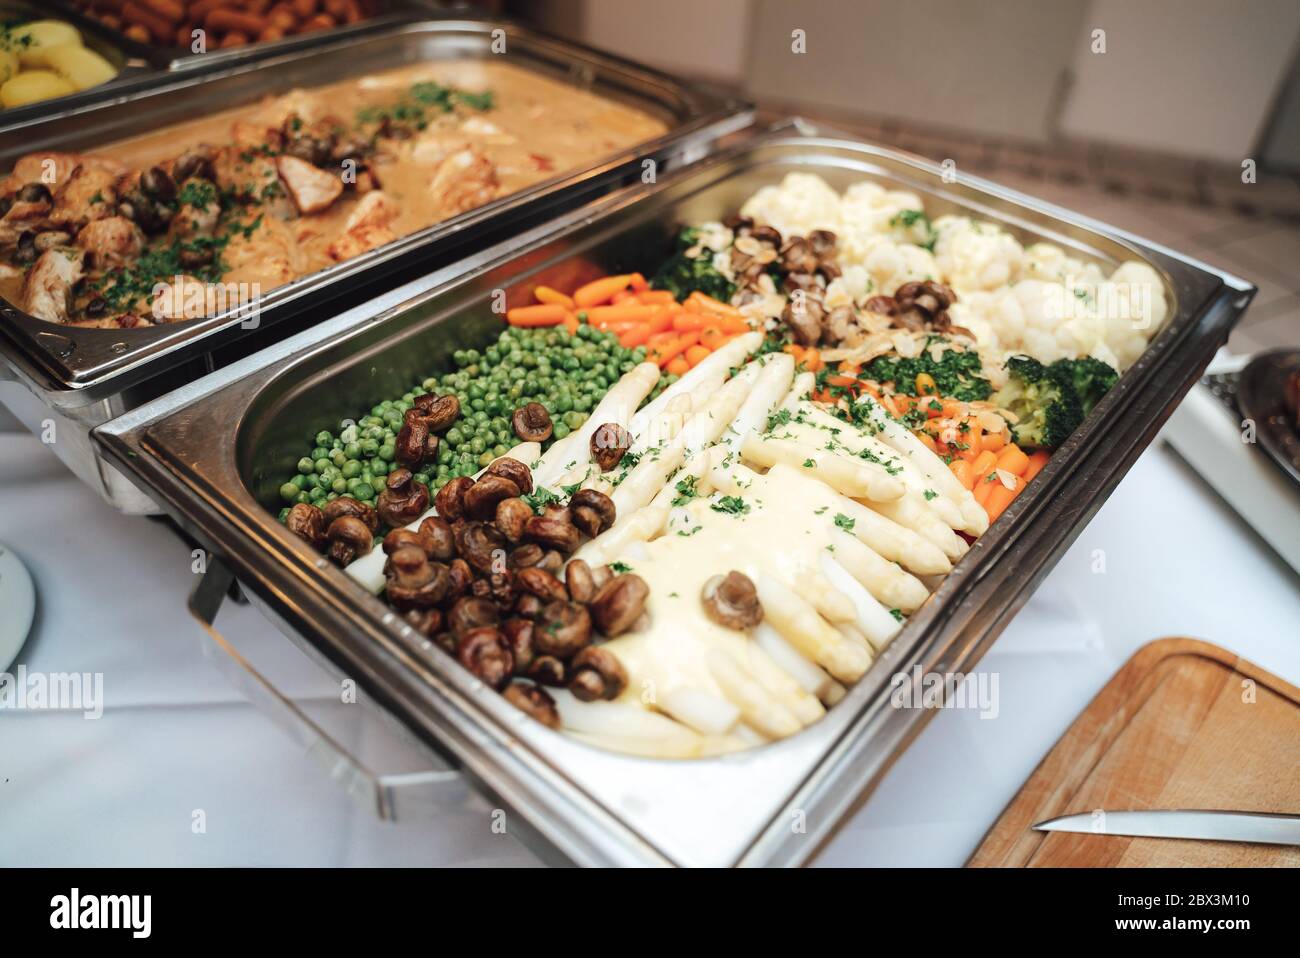 https://c8.alamy.com/comp/2BX3M10/stainless-self-service-buffet-table-with-various-meals-side-dishes-and-vegetable-celebration-party-birthday-or-wedding-concept-2BX3M10.jpg